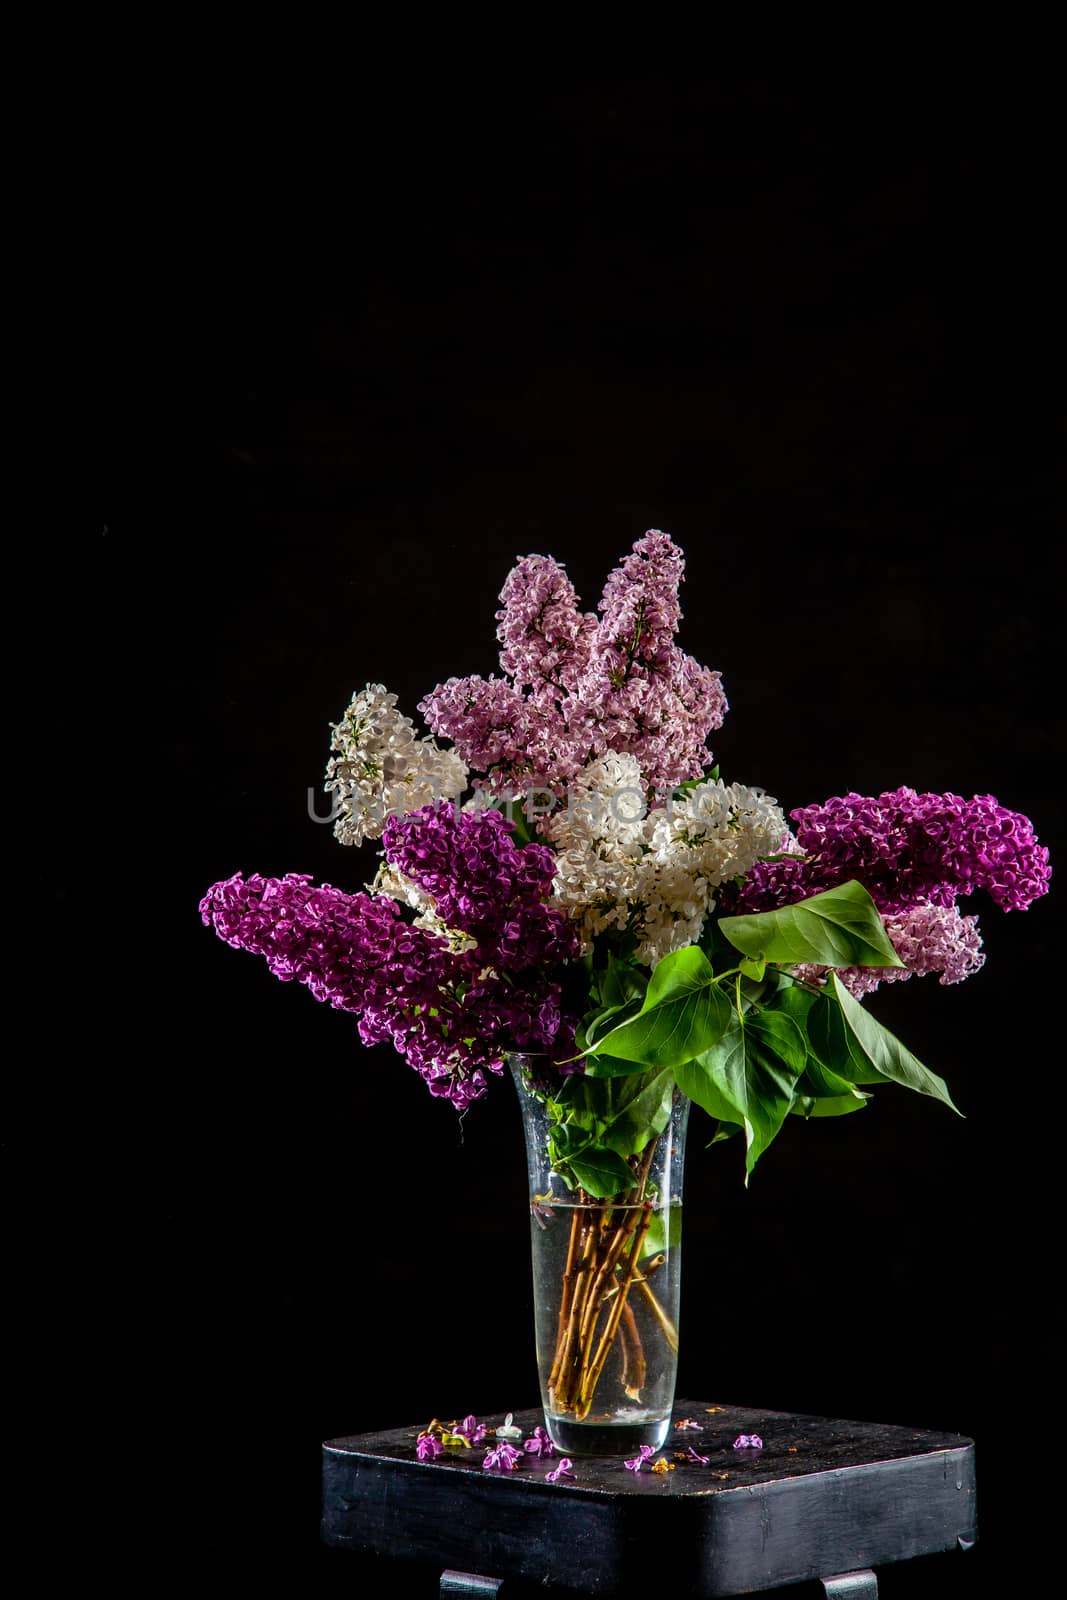 White and purple branches of lilac in glass vase on black background. Spring branch of blooming lilac on the table with black background. Fallen lilac flowers on the table.